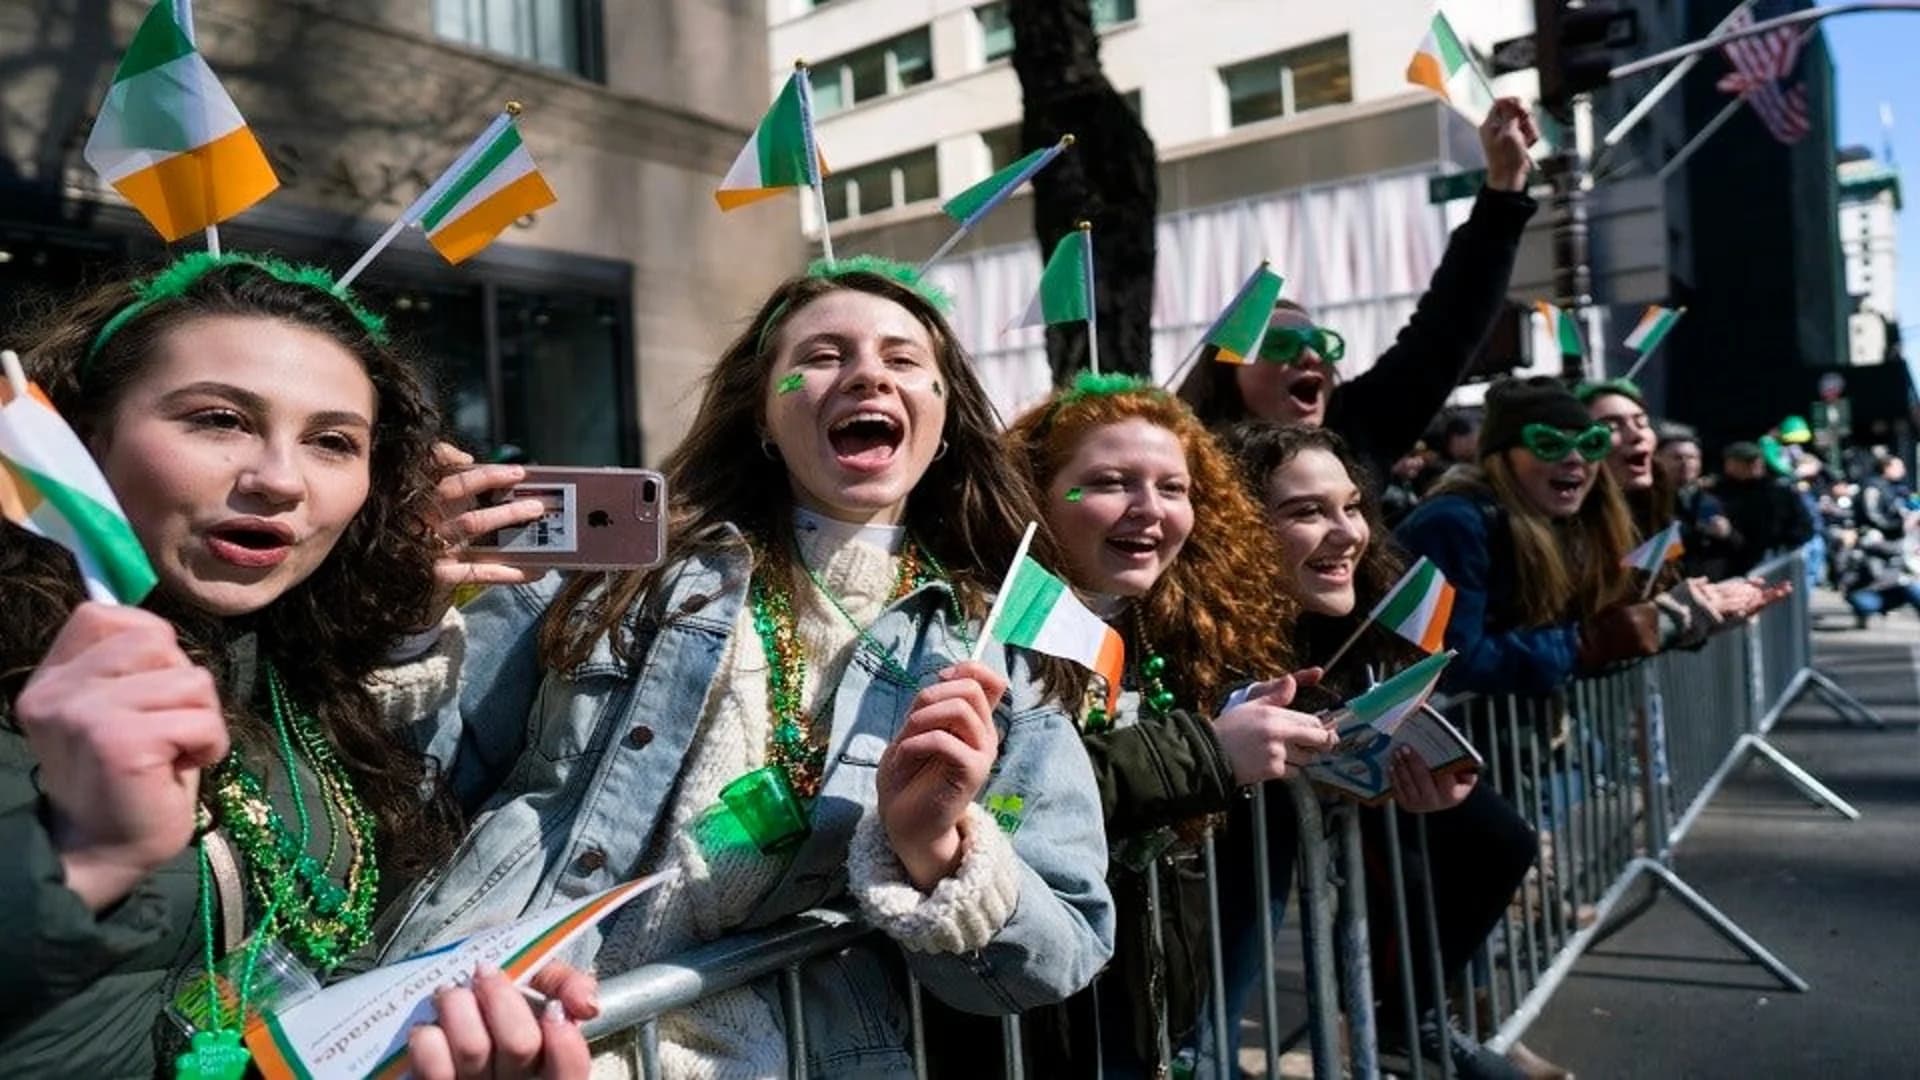 Guide: St. Patrick's Day Parades and events on Long Island